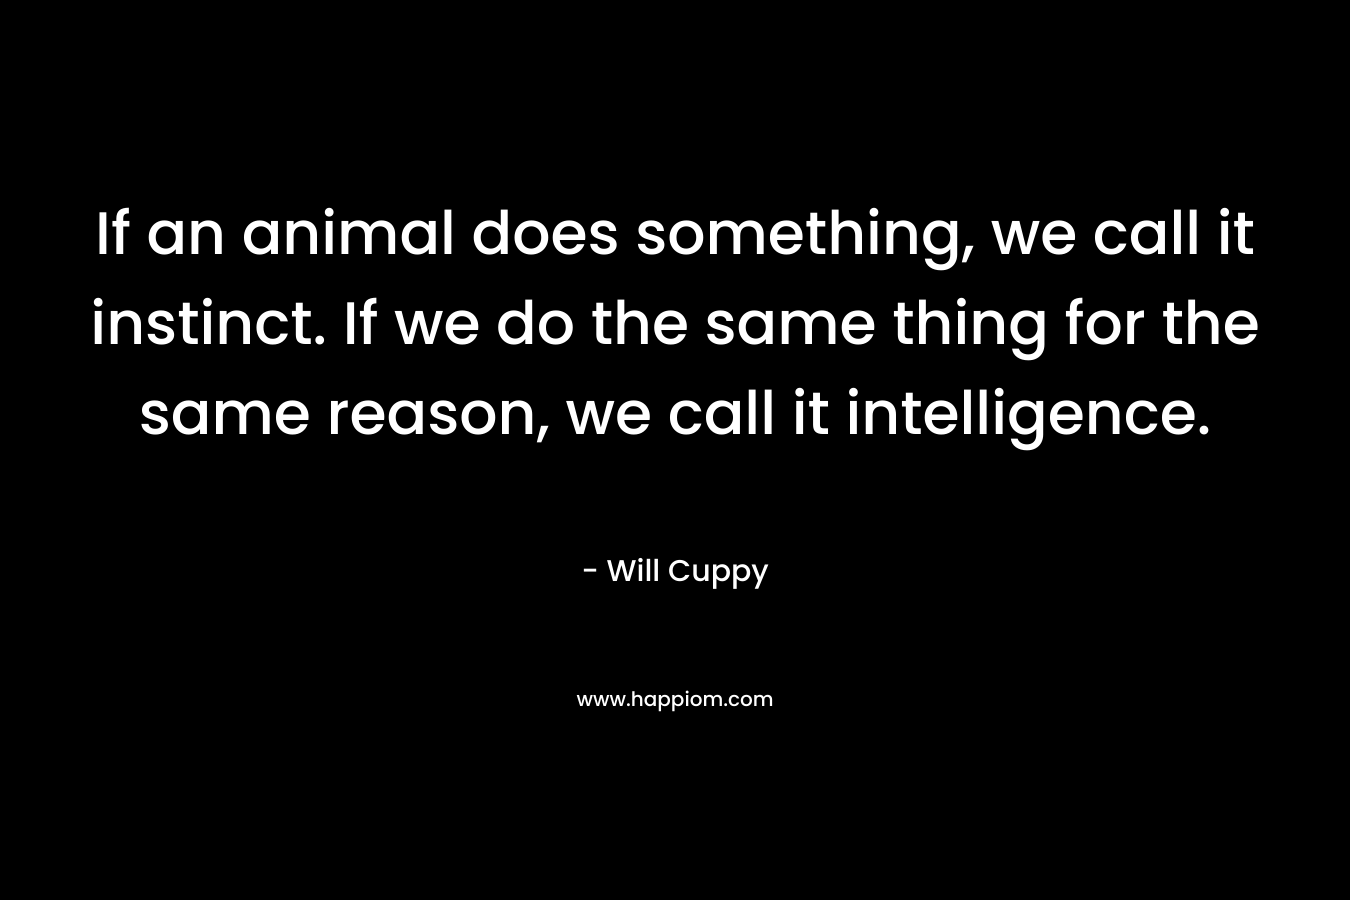 If an animal does something, we call it instinct. If we do the same thing for the same reason, we call it intelligence. – Will Cuppy